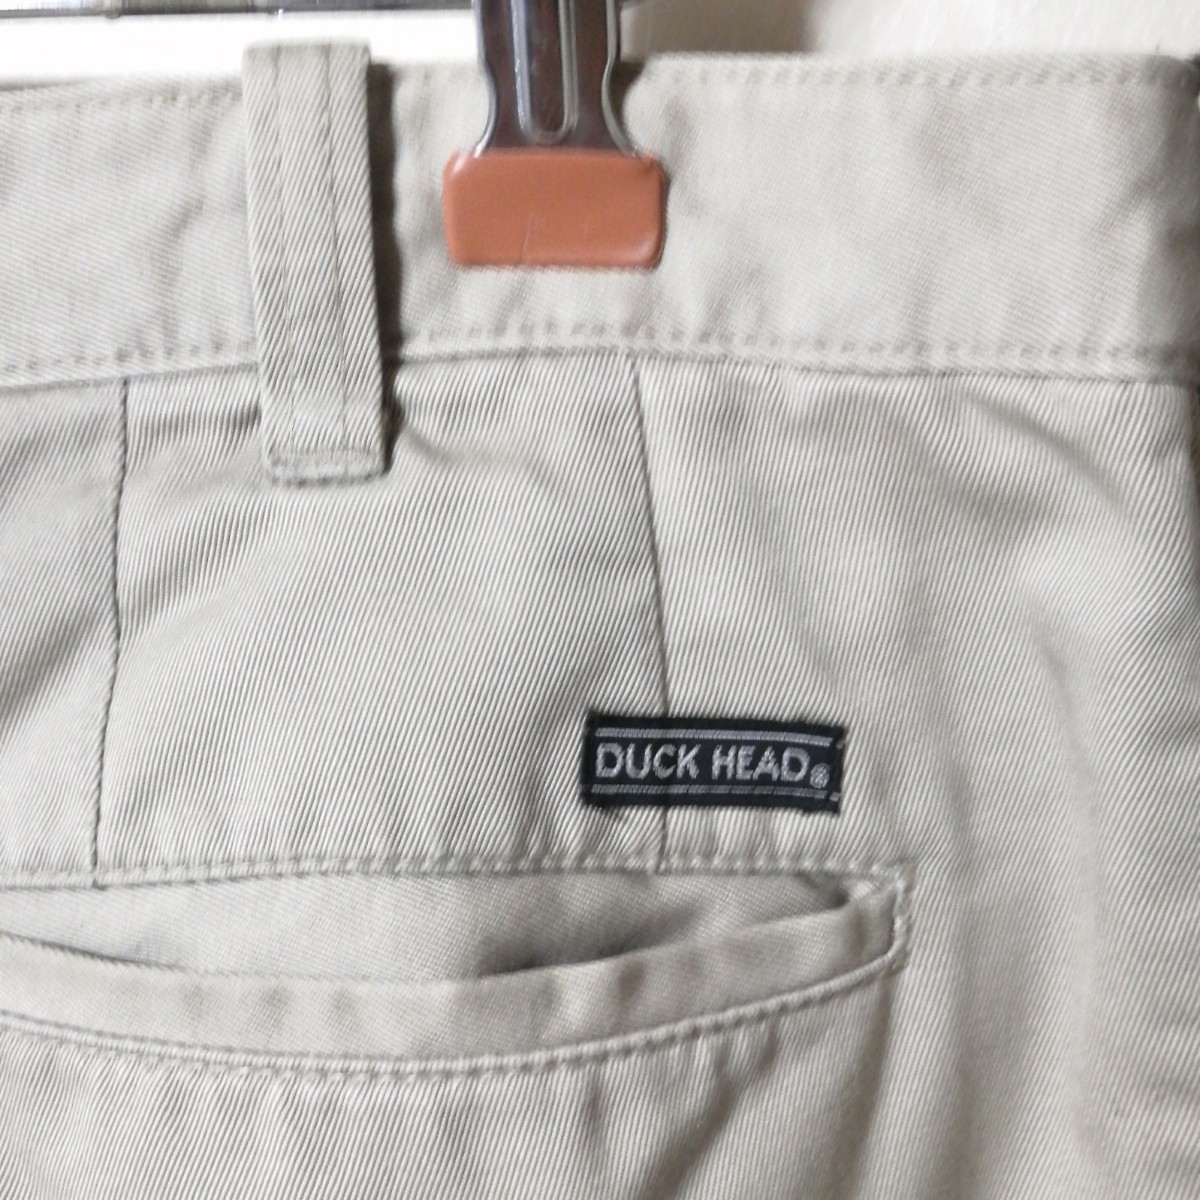  chinos Duck Head XL beige right . part . some stains equipped w82 waist 30 72